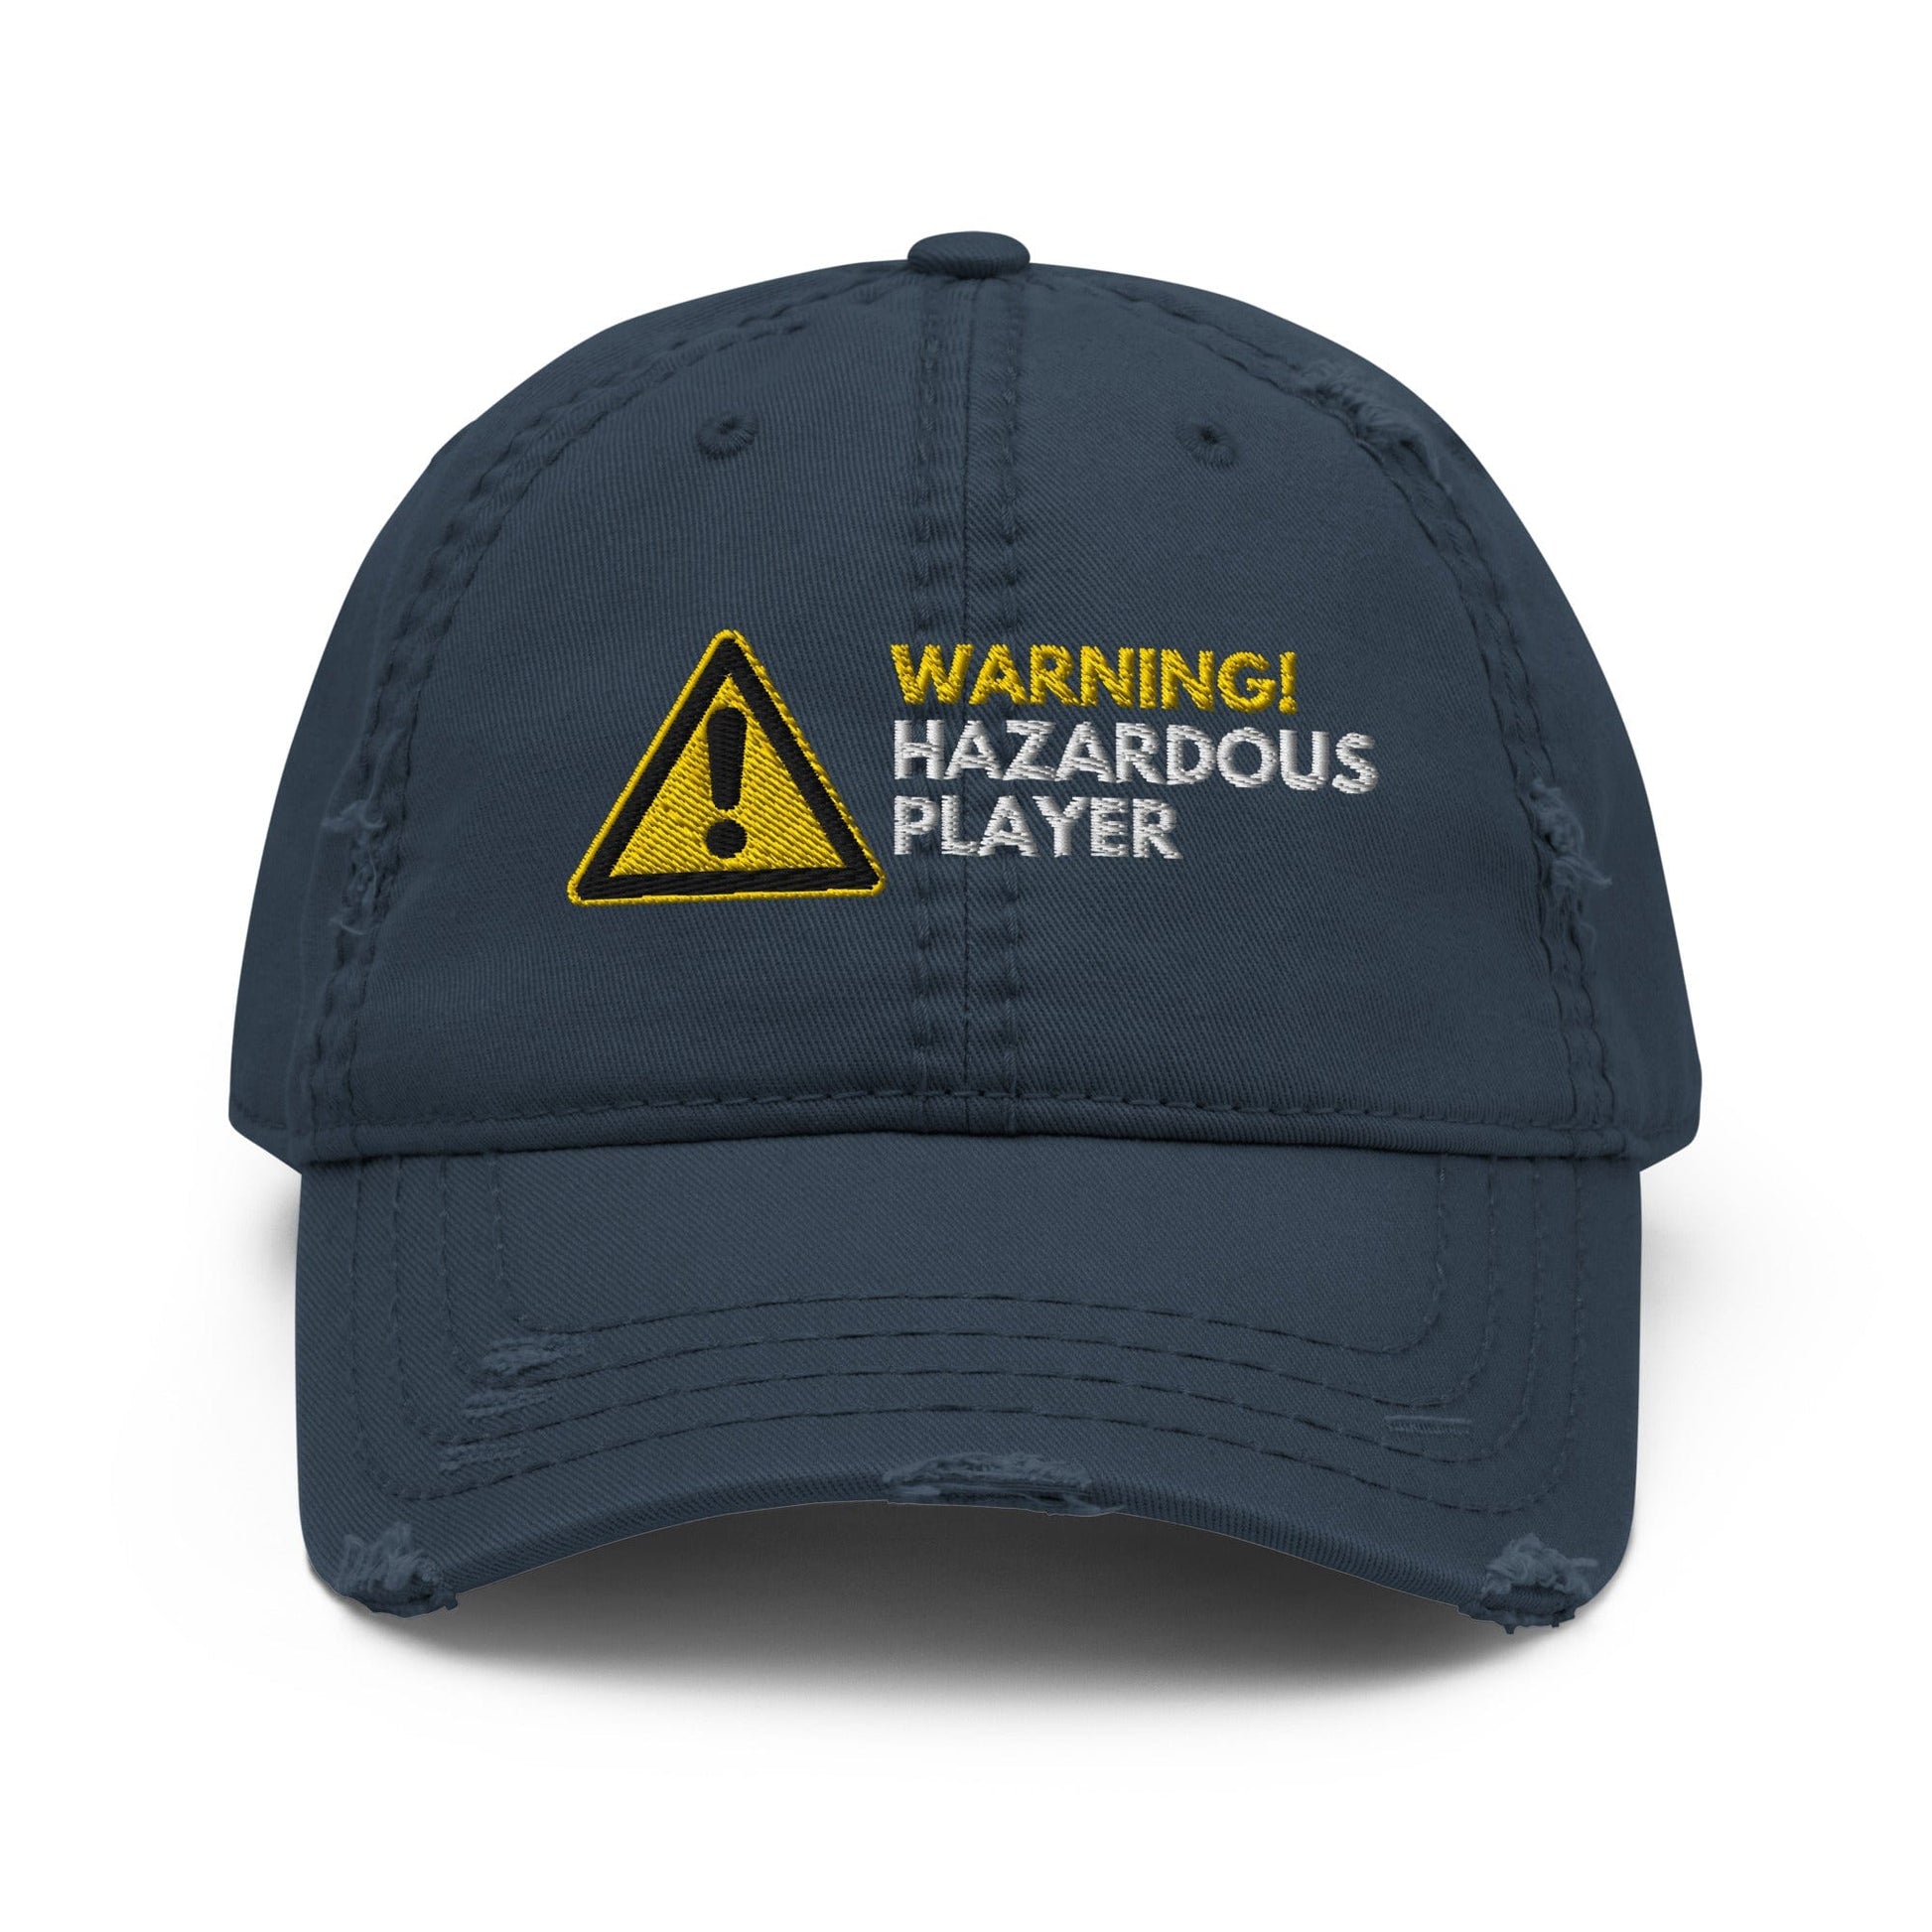 Funny Golfer Gifts  Distressed Cap Navy Warning Hazardous Player Distressed Hat